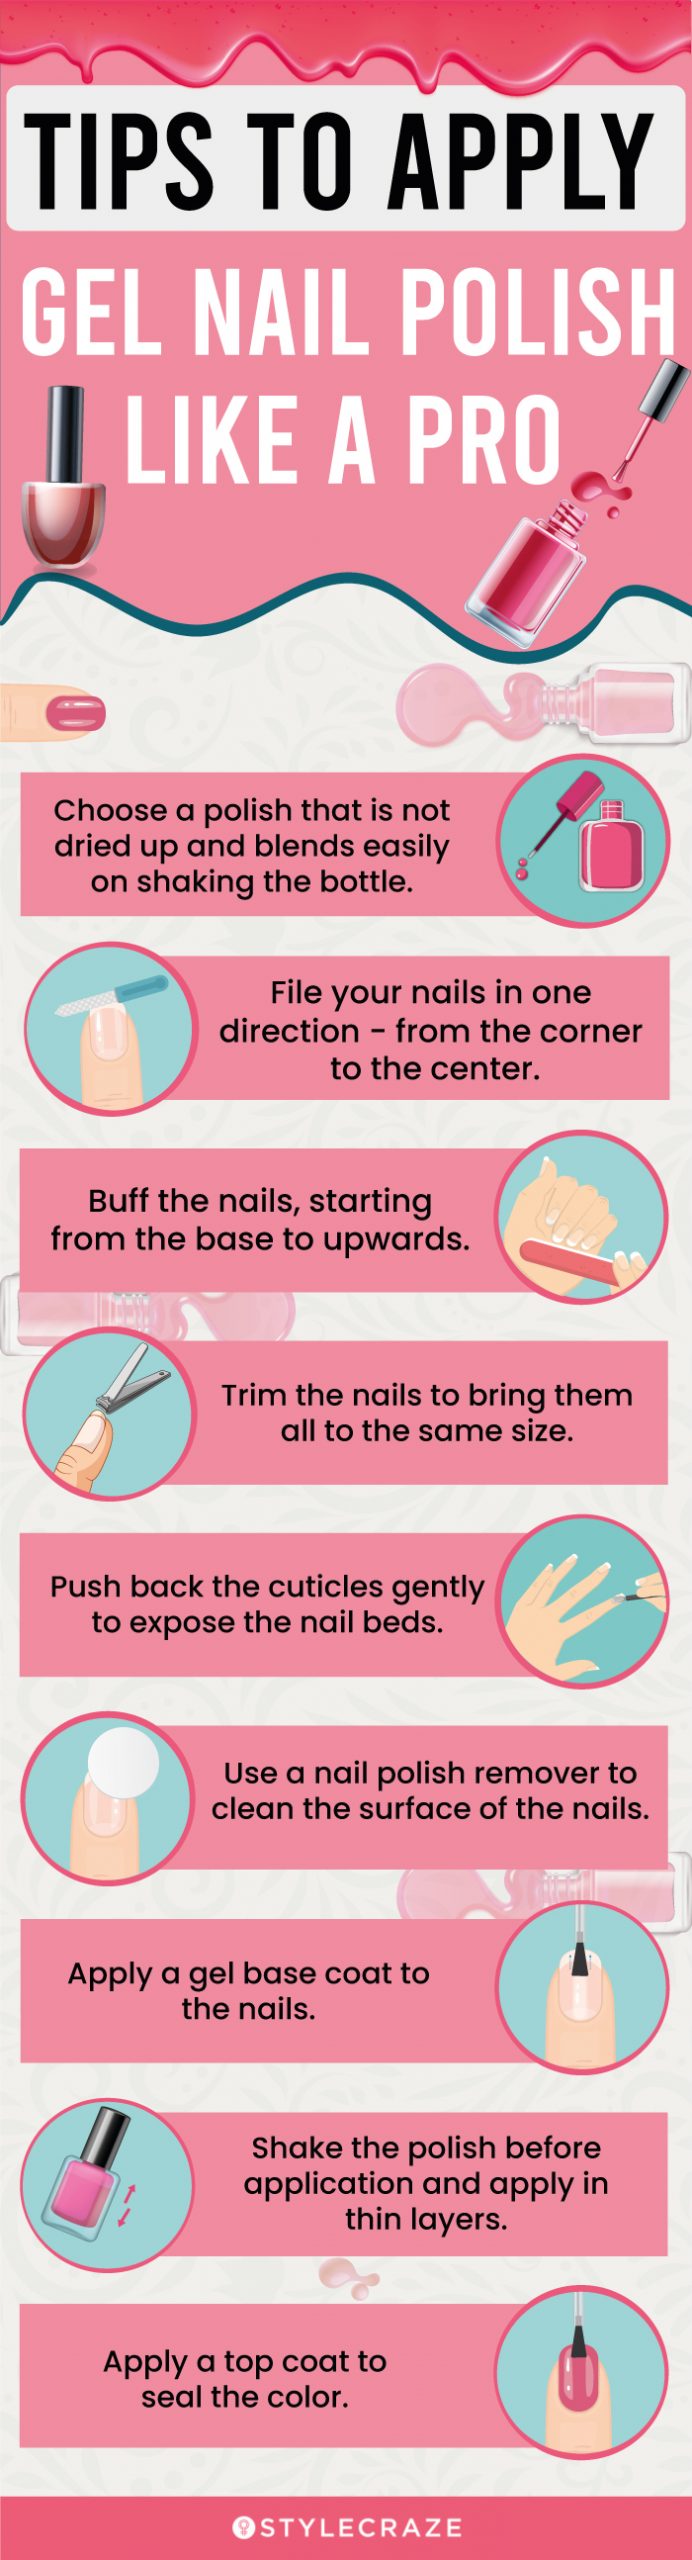 Tips To Apply Gel Polish Like A Pro (infographic)